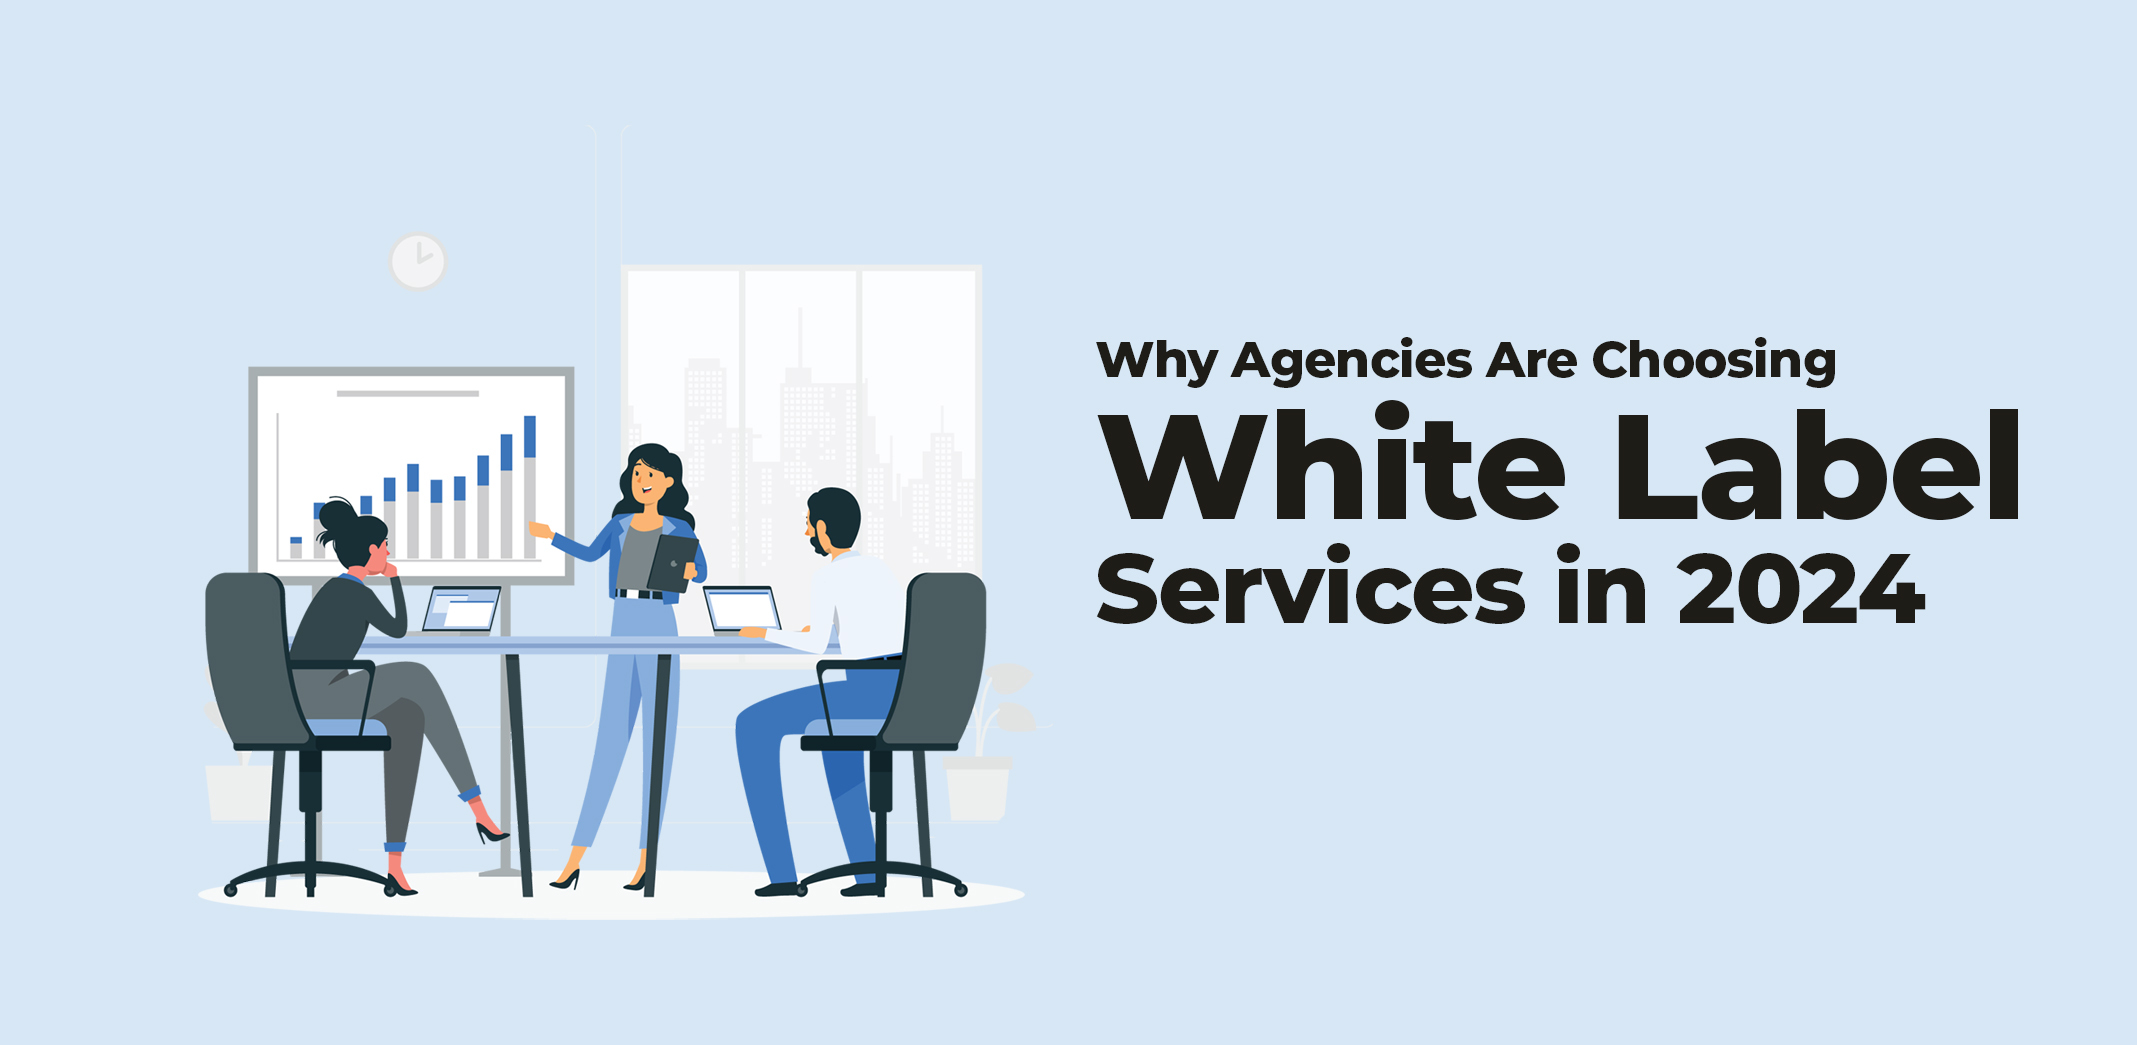 Why agencies are choosing White Label services in 2024